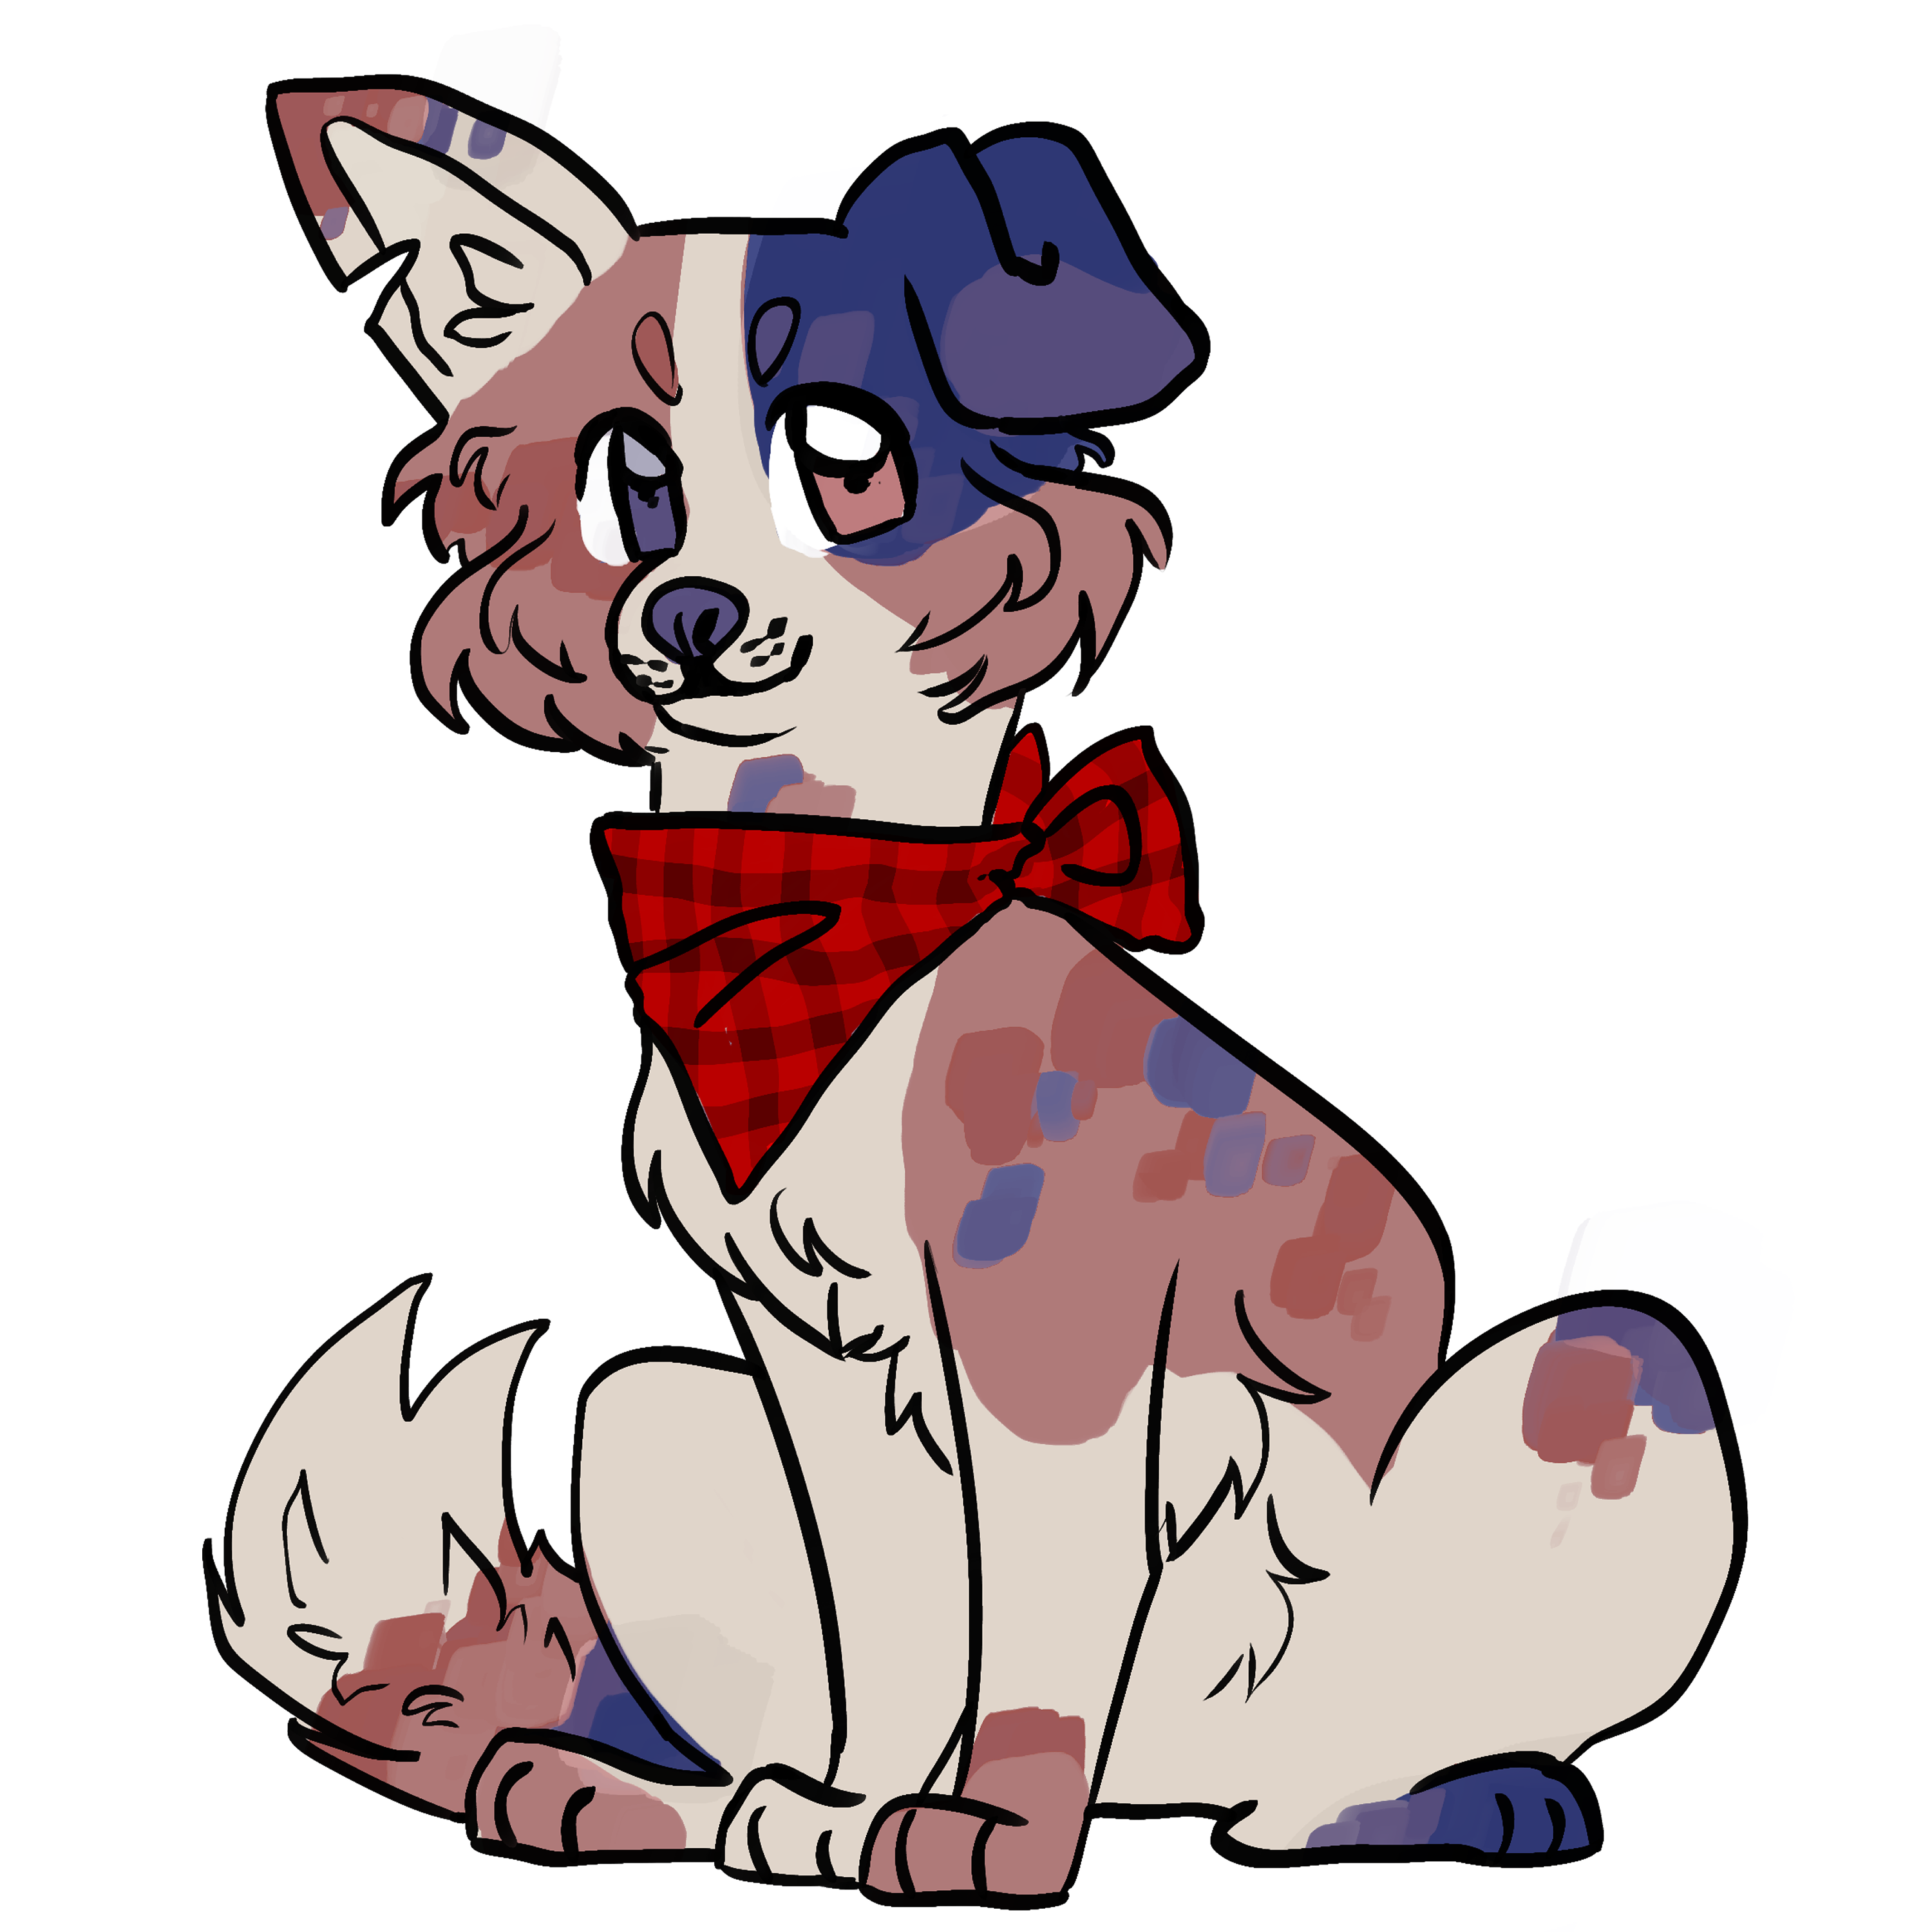 a drawing of a cartoon dog with blue and brown markings sitting down and looking at the viewer.